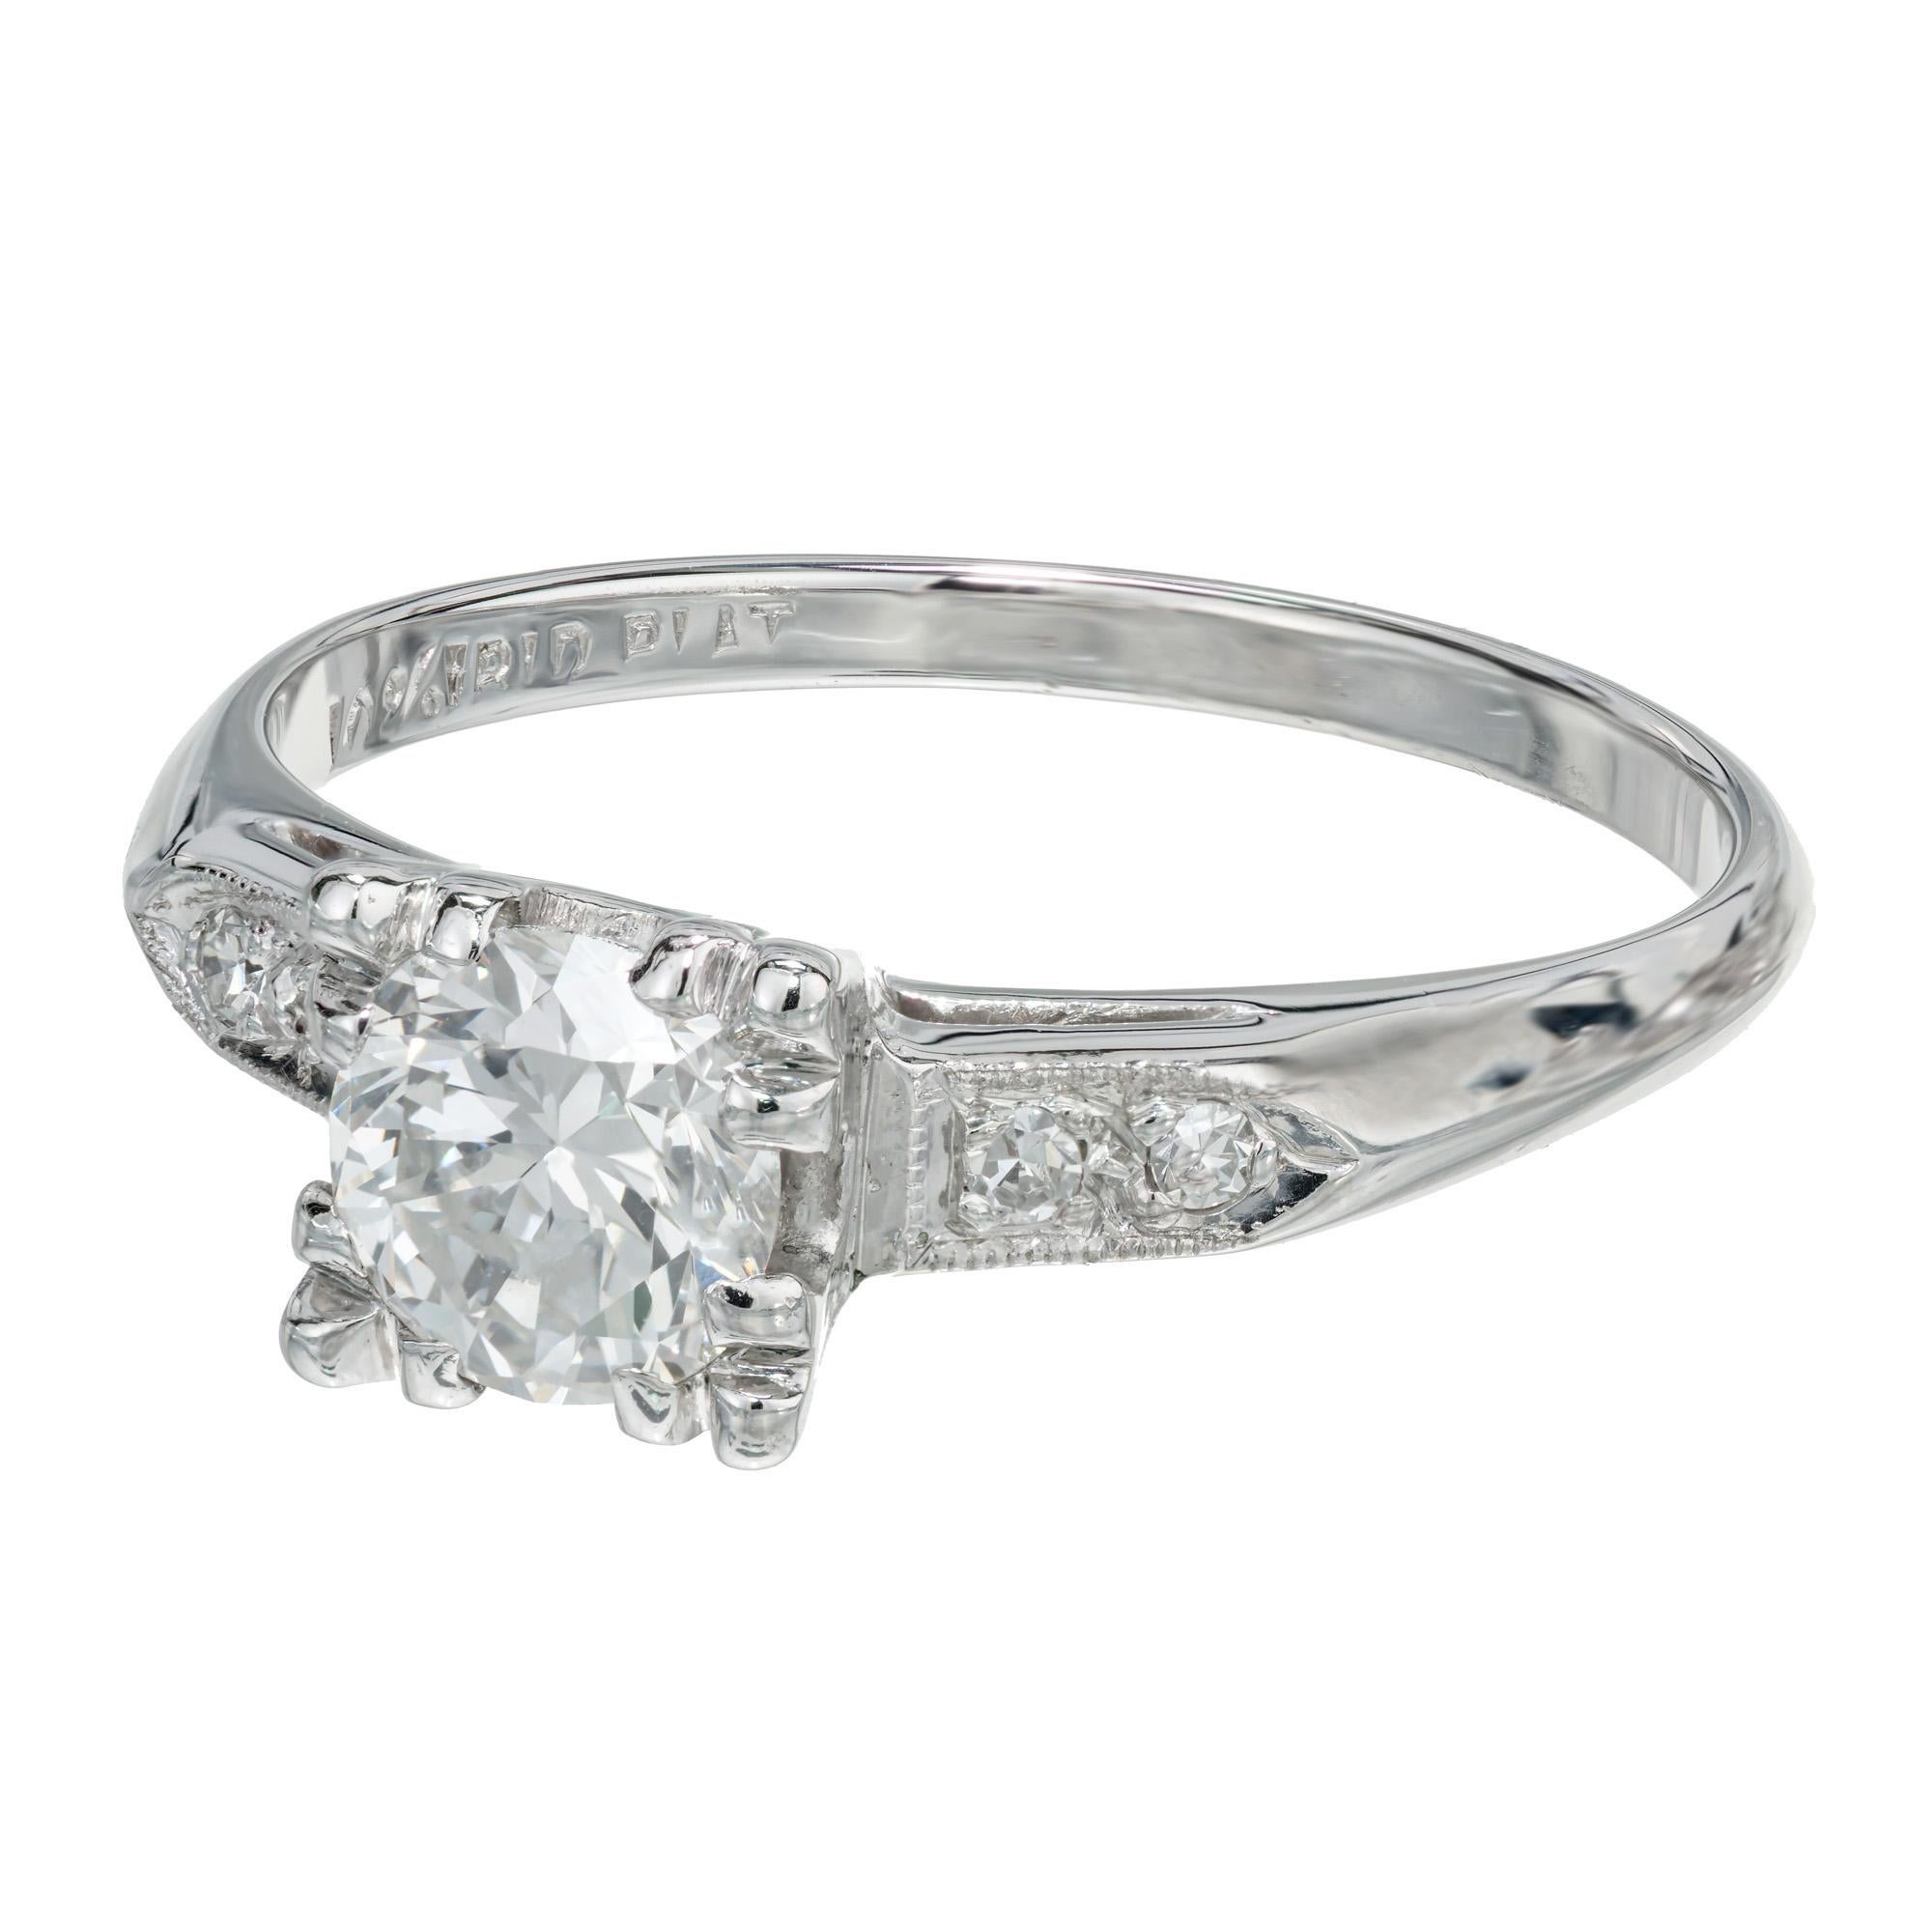 Classic 1940's square top diamond engagement ring. EGL certified center stone, is a brilliant round cut diamond, F-G (near colorless) and a VS2. Mounted in a solid platinum setting with 4 round cut accent diamonds along the shoulders. 

1 round